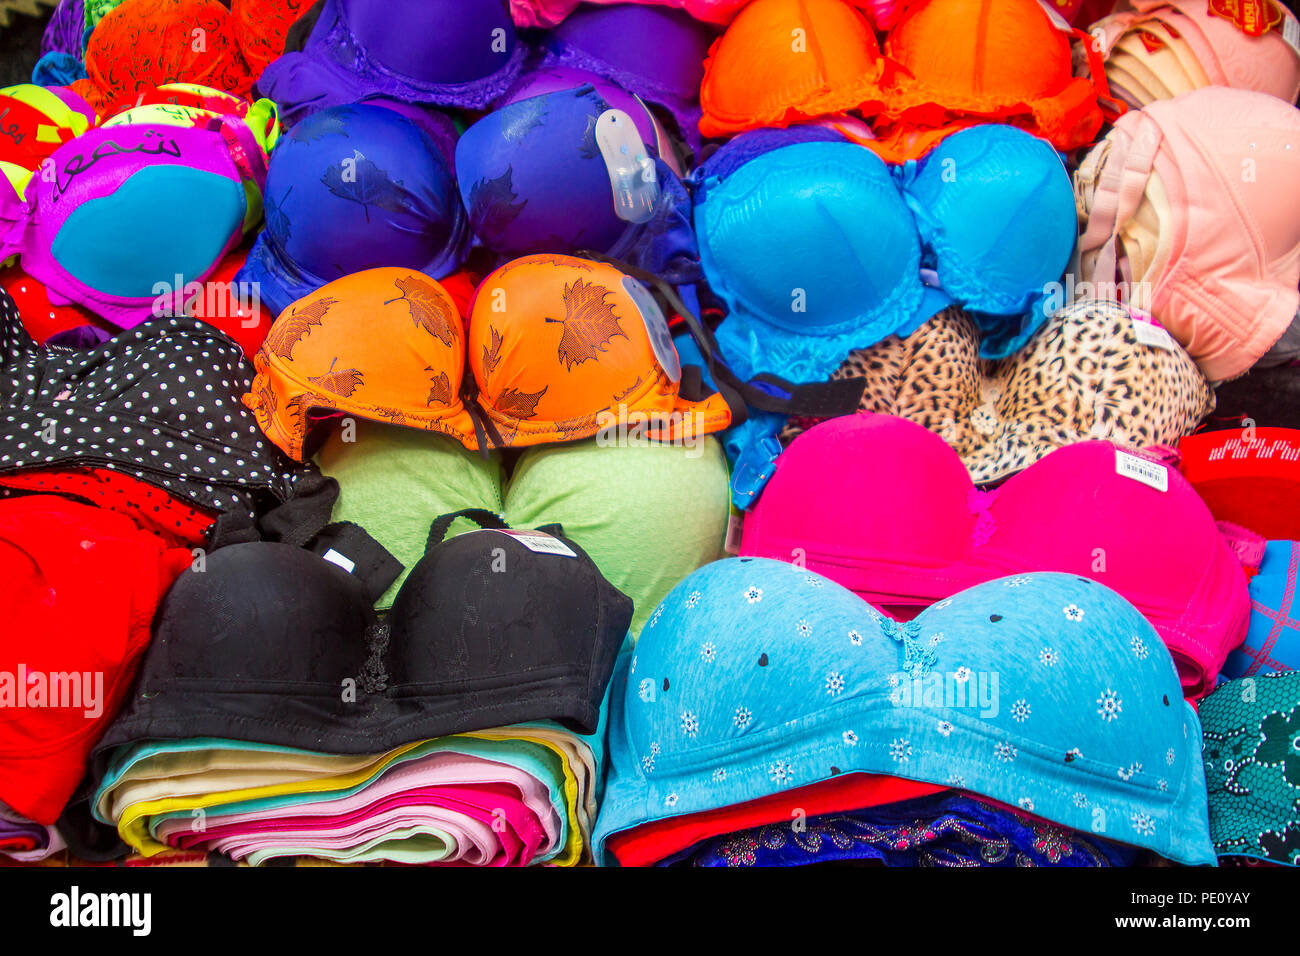 11 May 2018 Ladies underwear for sale in a small shop in the Arab Quarter  of the Old city Jerusalem Israel Stock Photo - Alamy